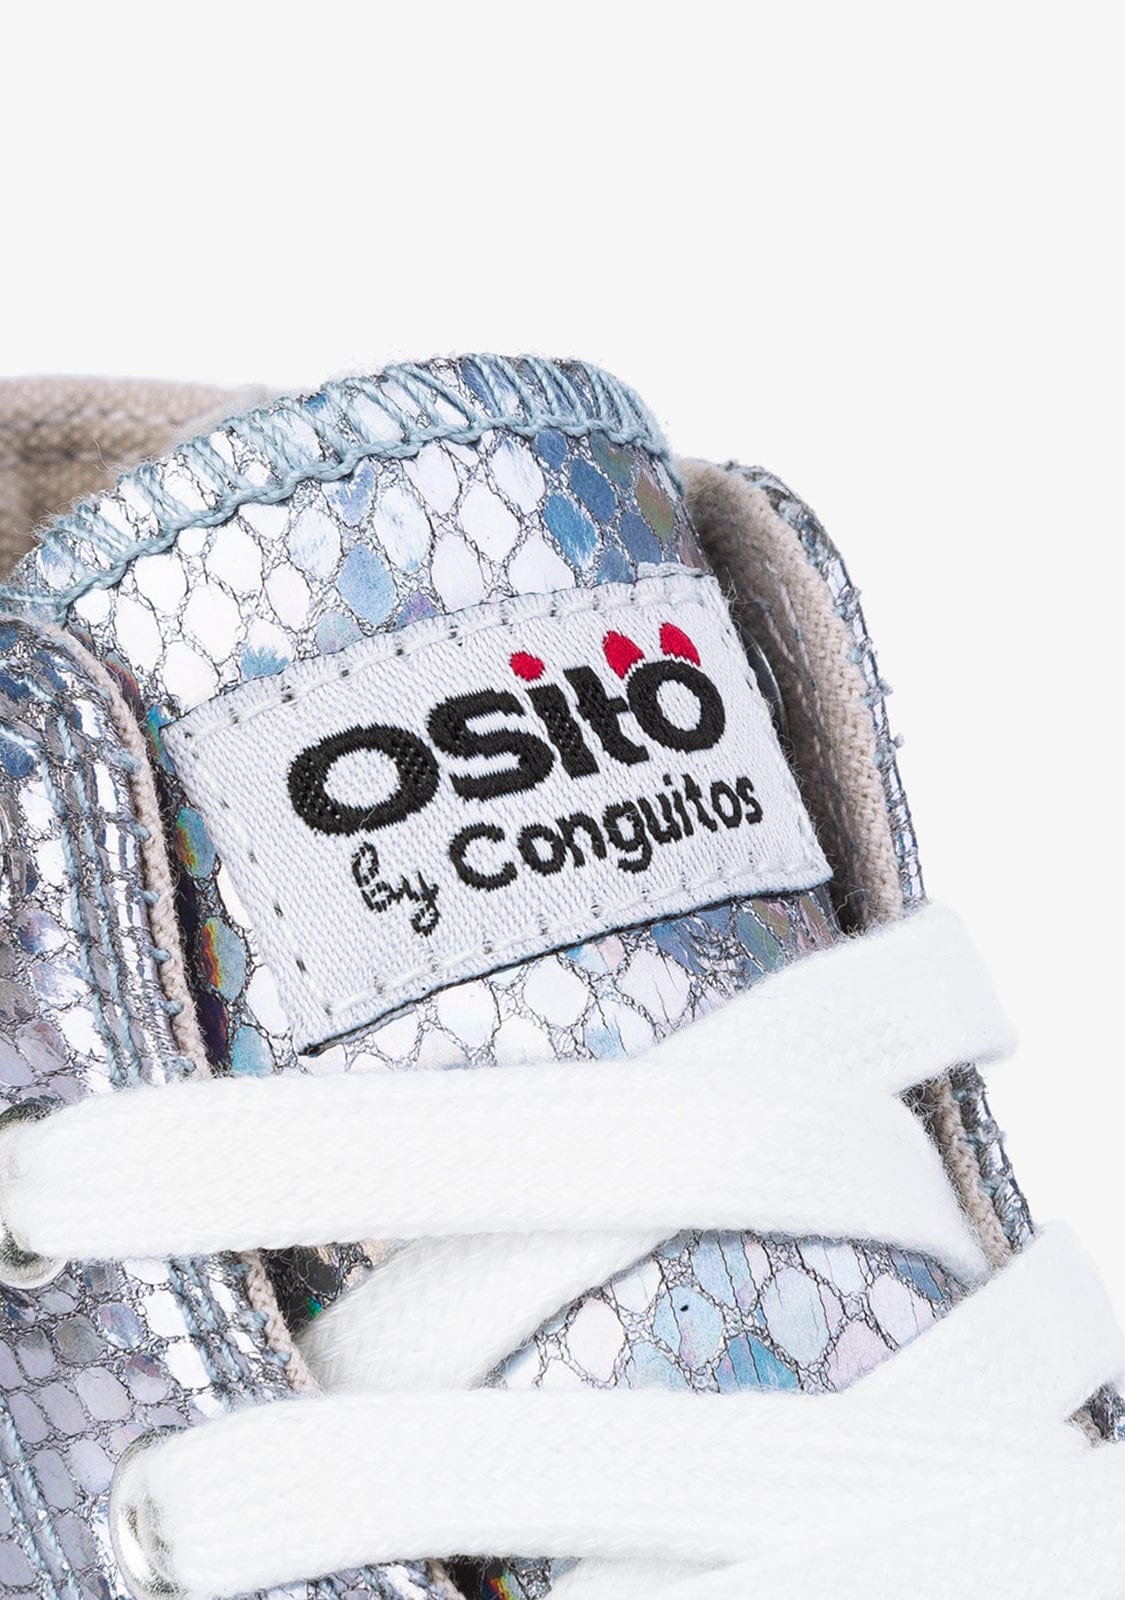 OSITO Shoes Baby's Silver Snake Hi-Top Sneakers Metallized